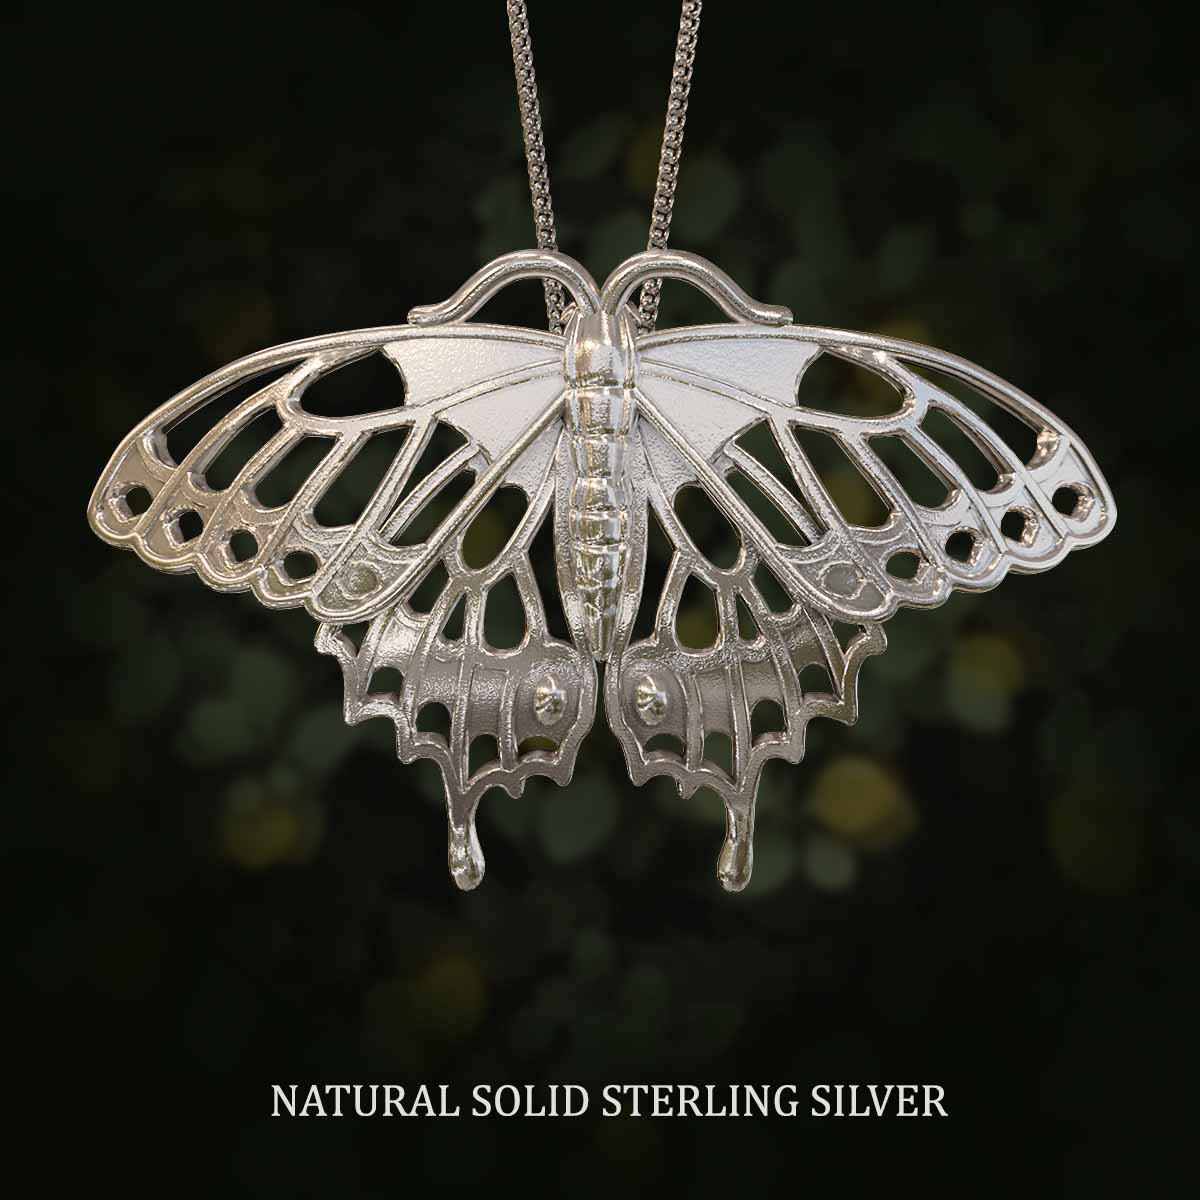     Natural-Satin-Polish-Solid-Sterling-Silver-Swallowtail-Butterfly-Pendant-Jewelry-For-Necklace